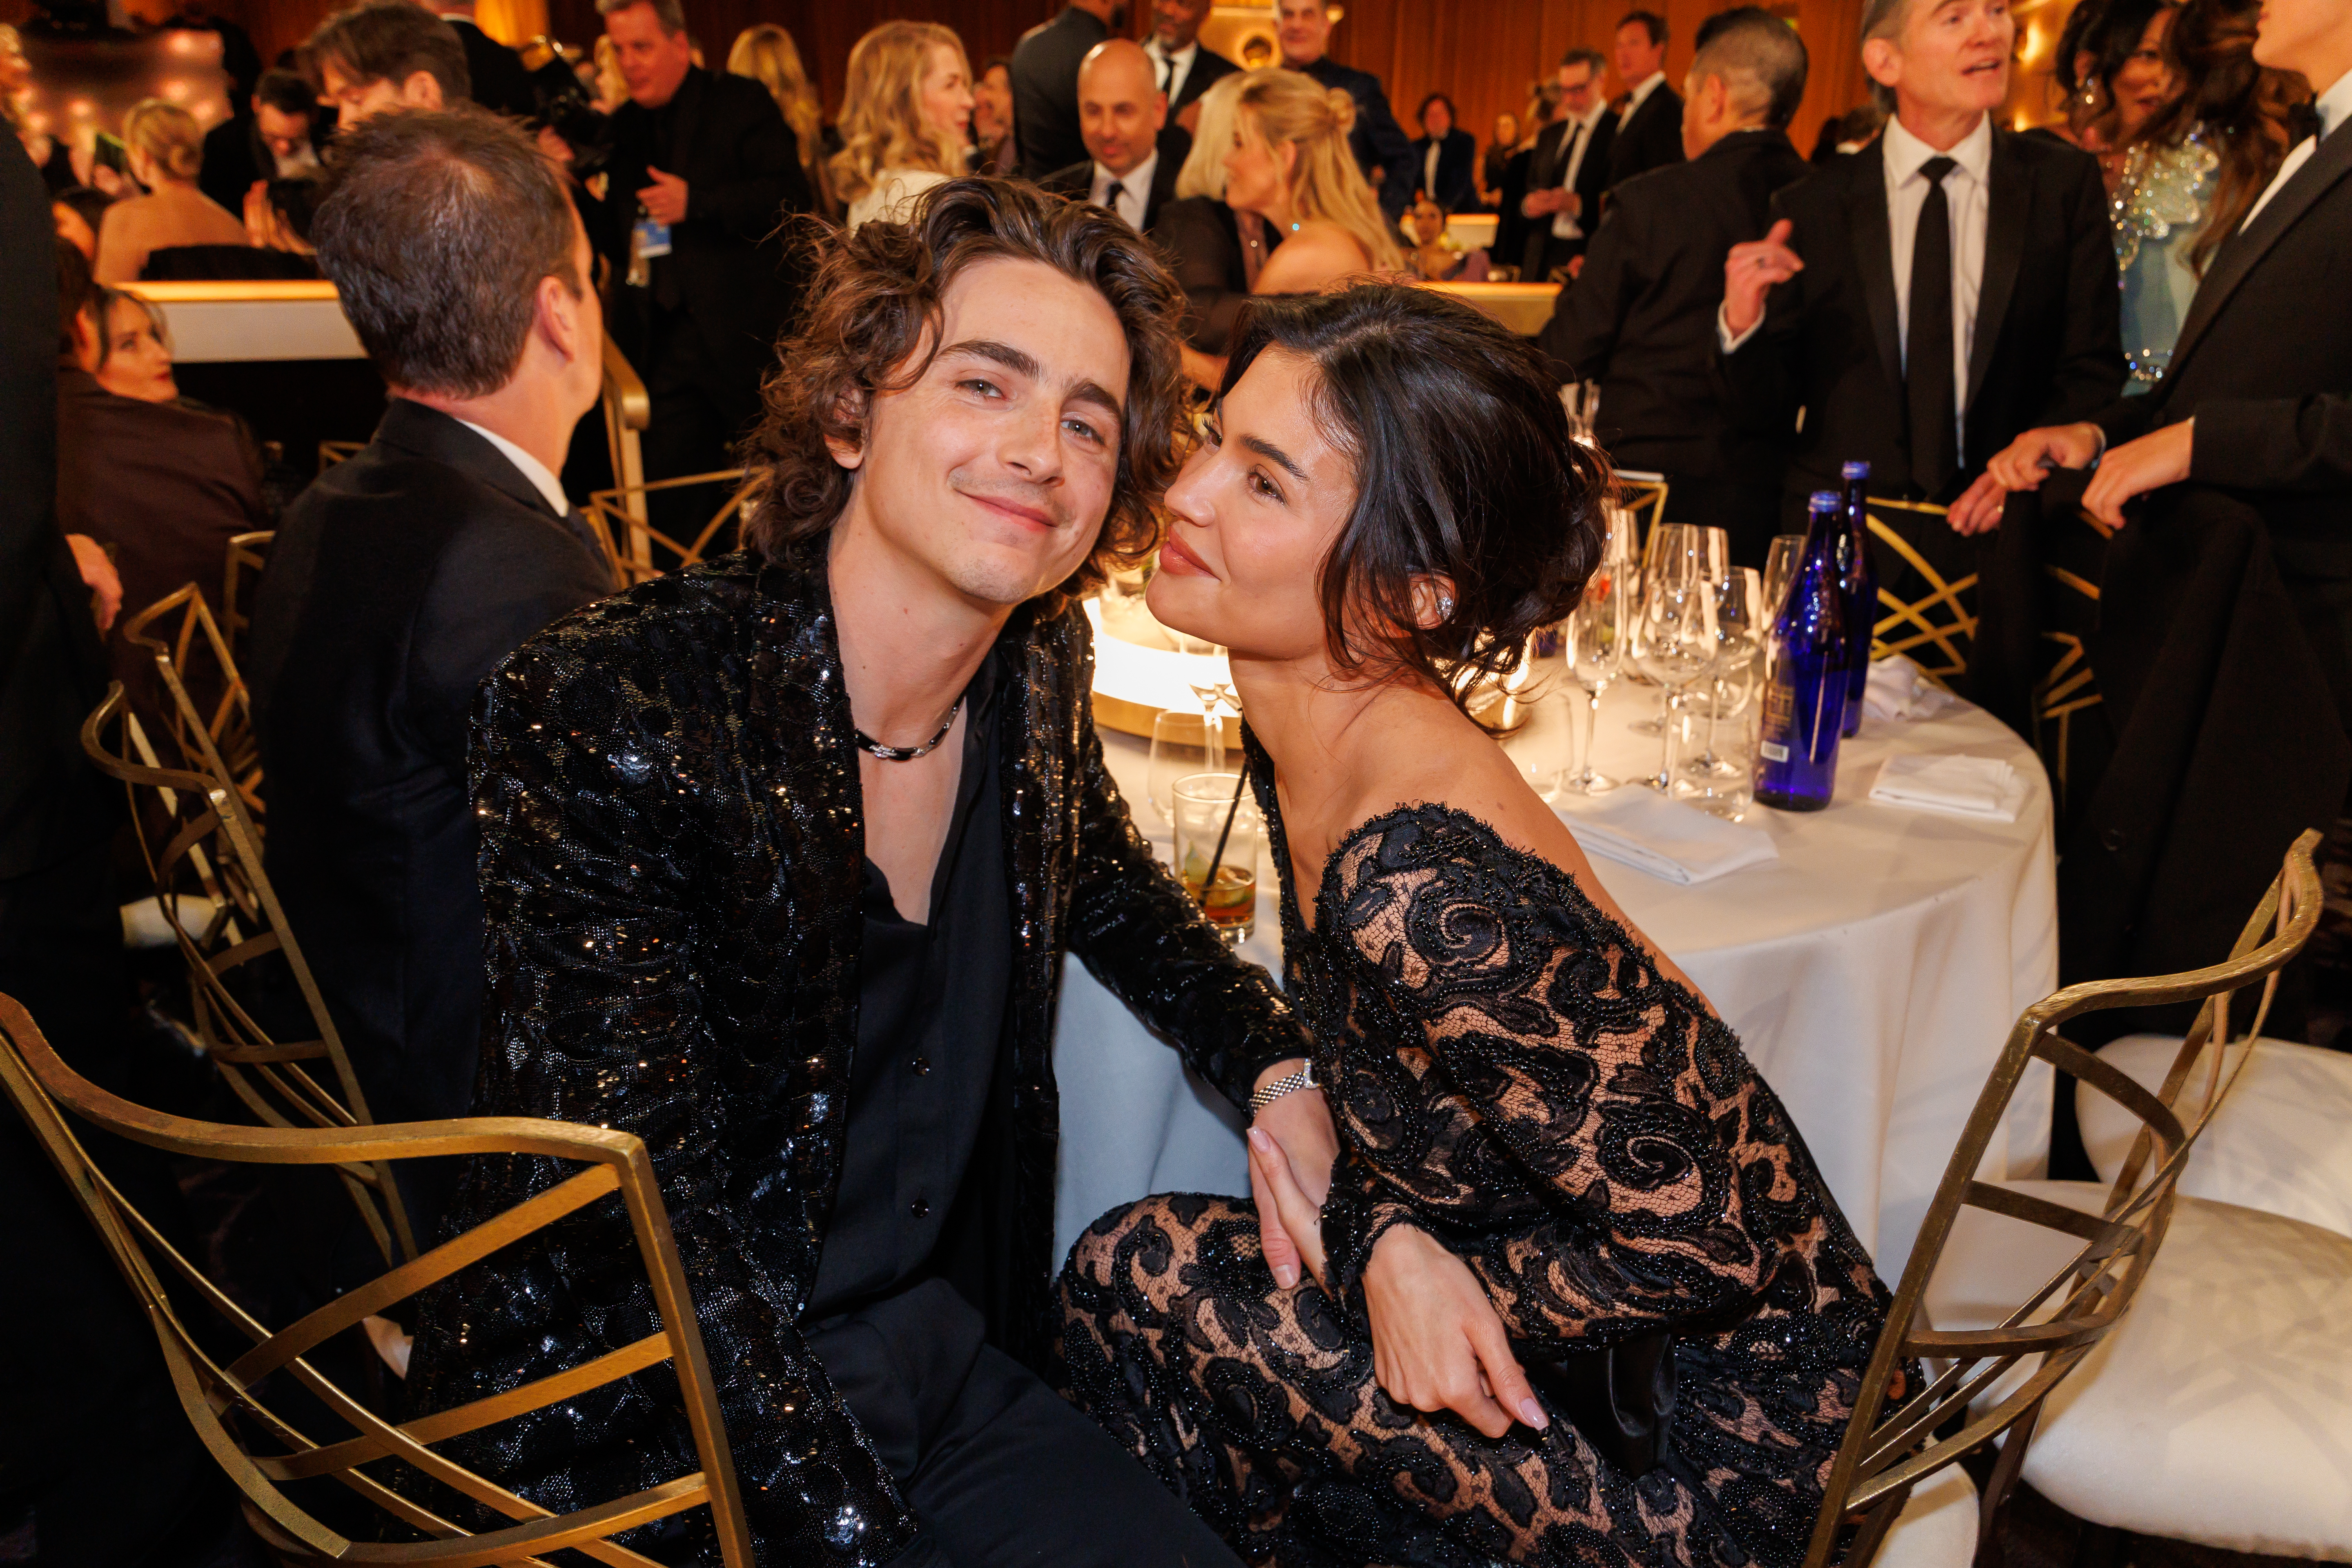 The TV star began dating Timothée Chalamet last year, but an insider claims they've 'drifted apart'